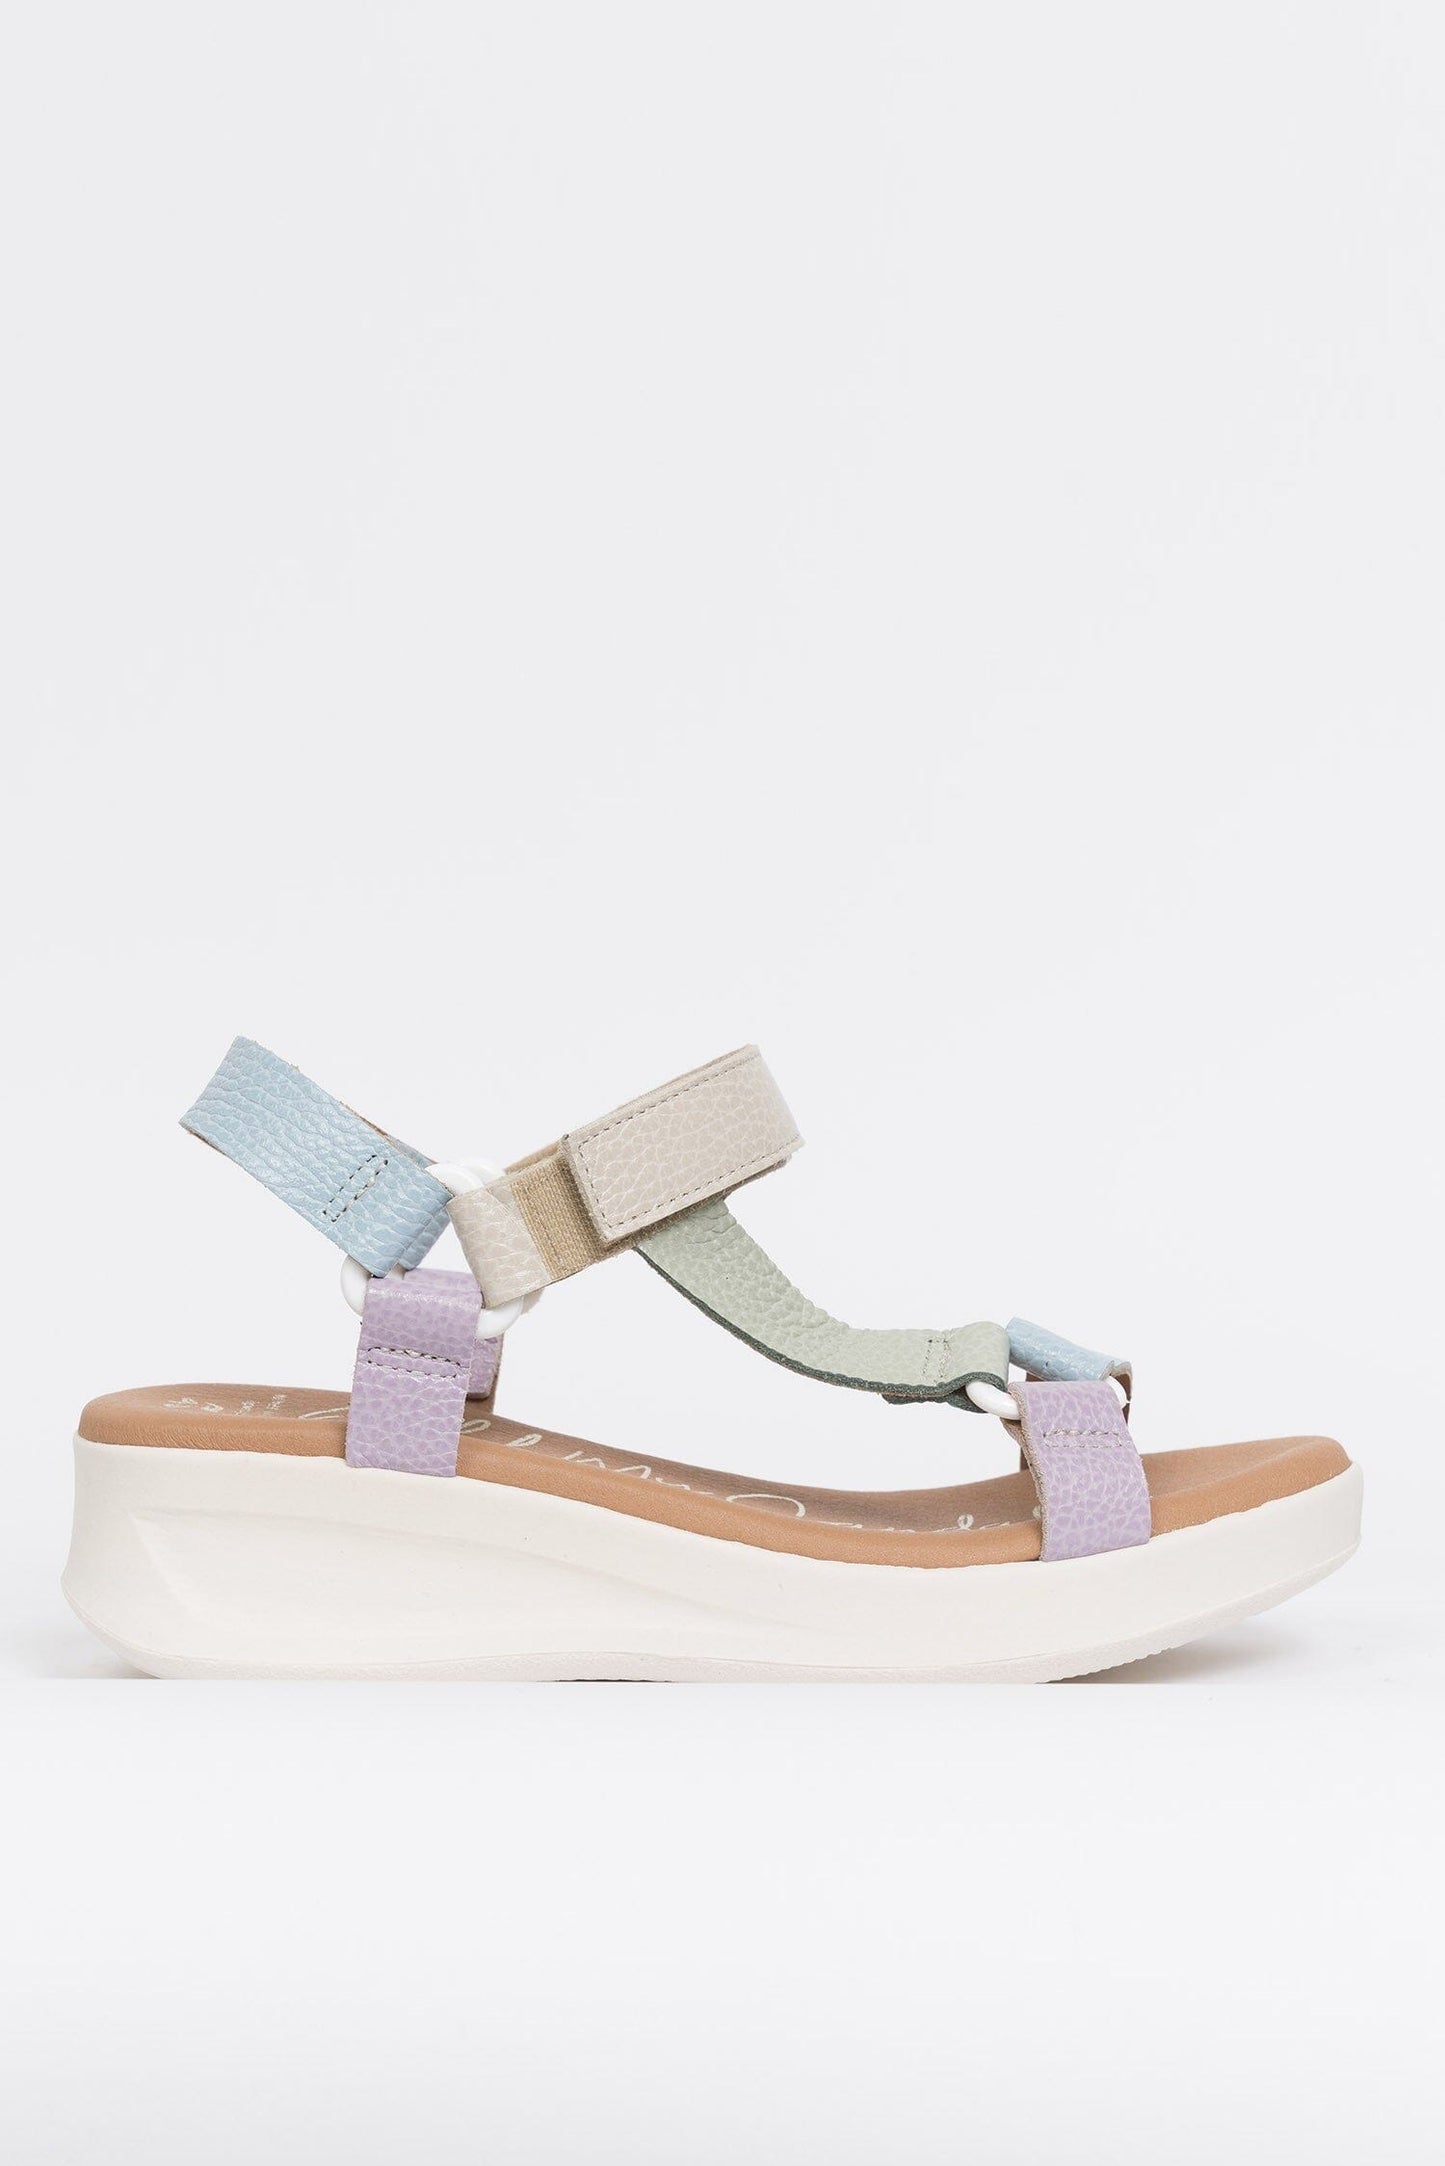 5186 Spanish leather Sport delux sandals/wedge with velcro in Pastel colour sandals Sam Star Shoes 